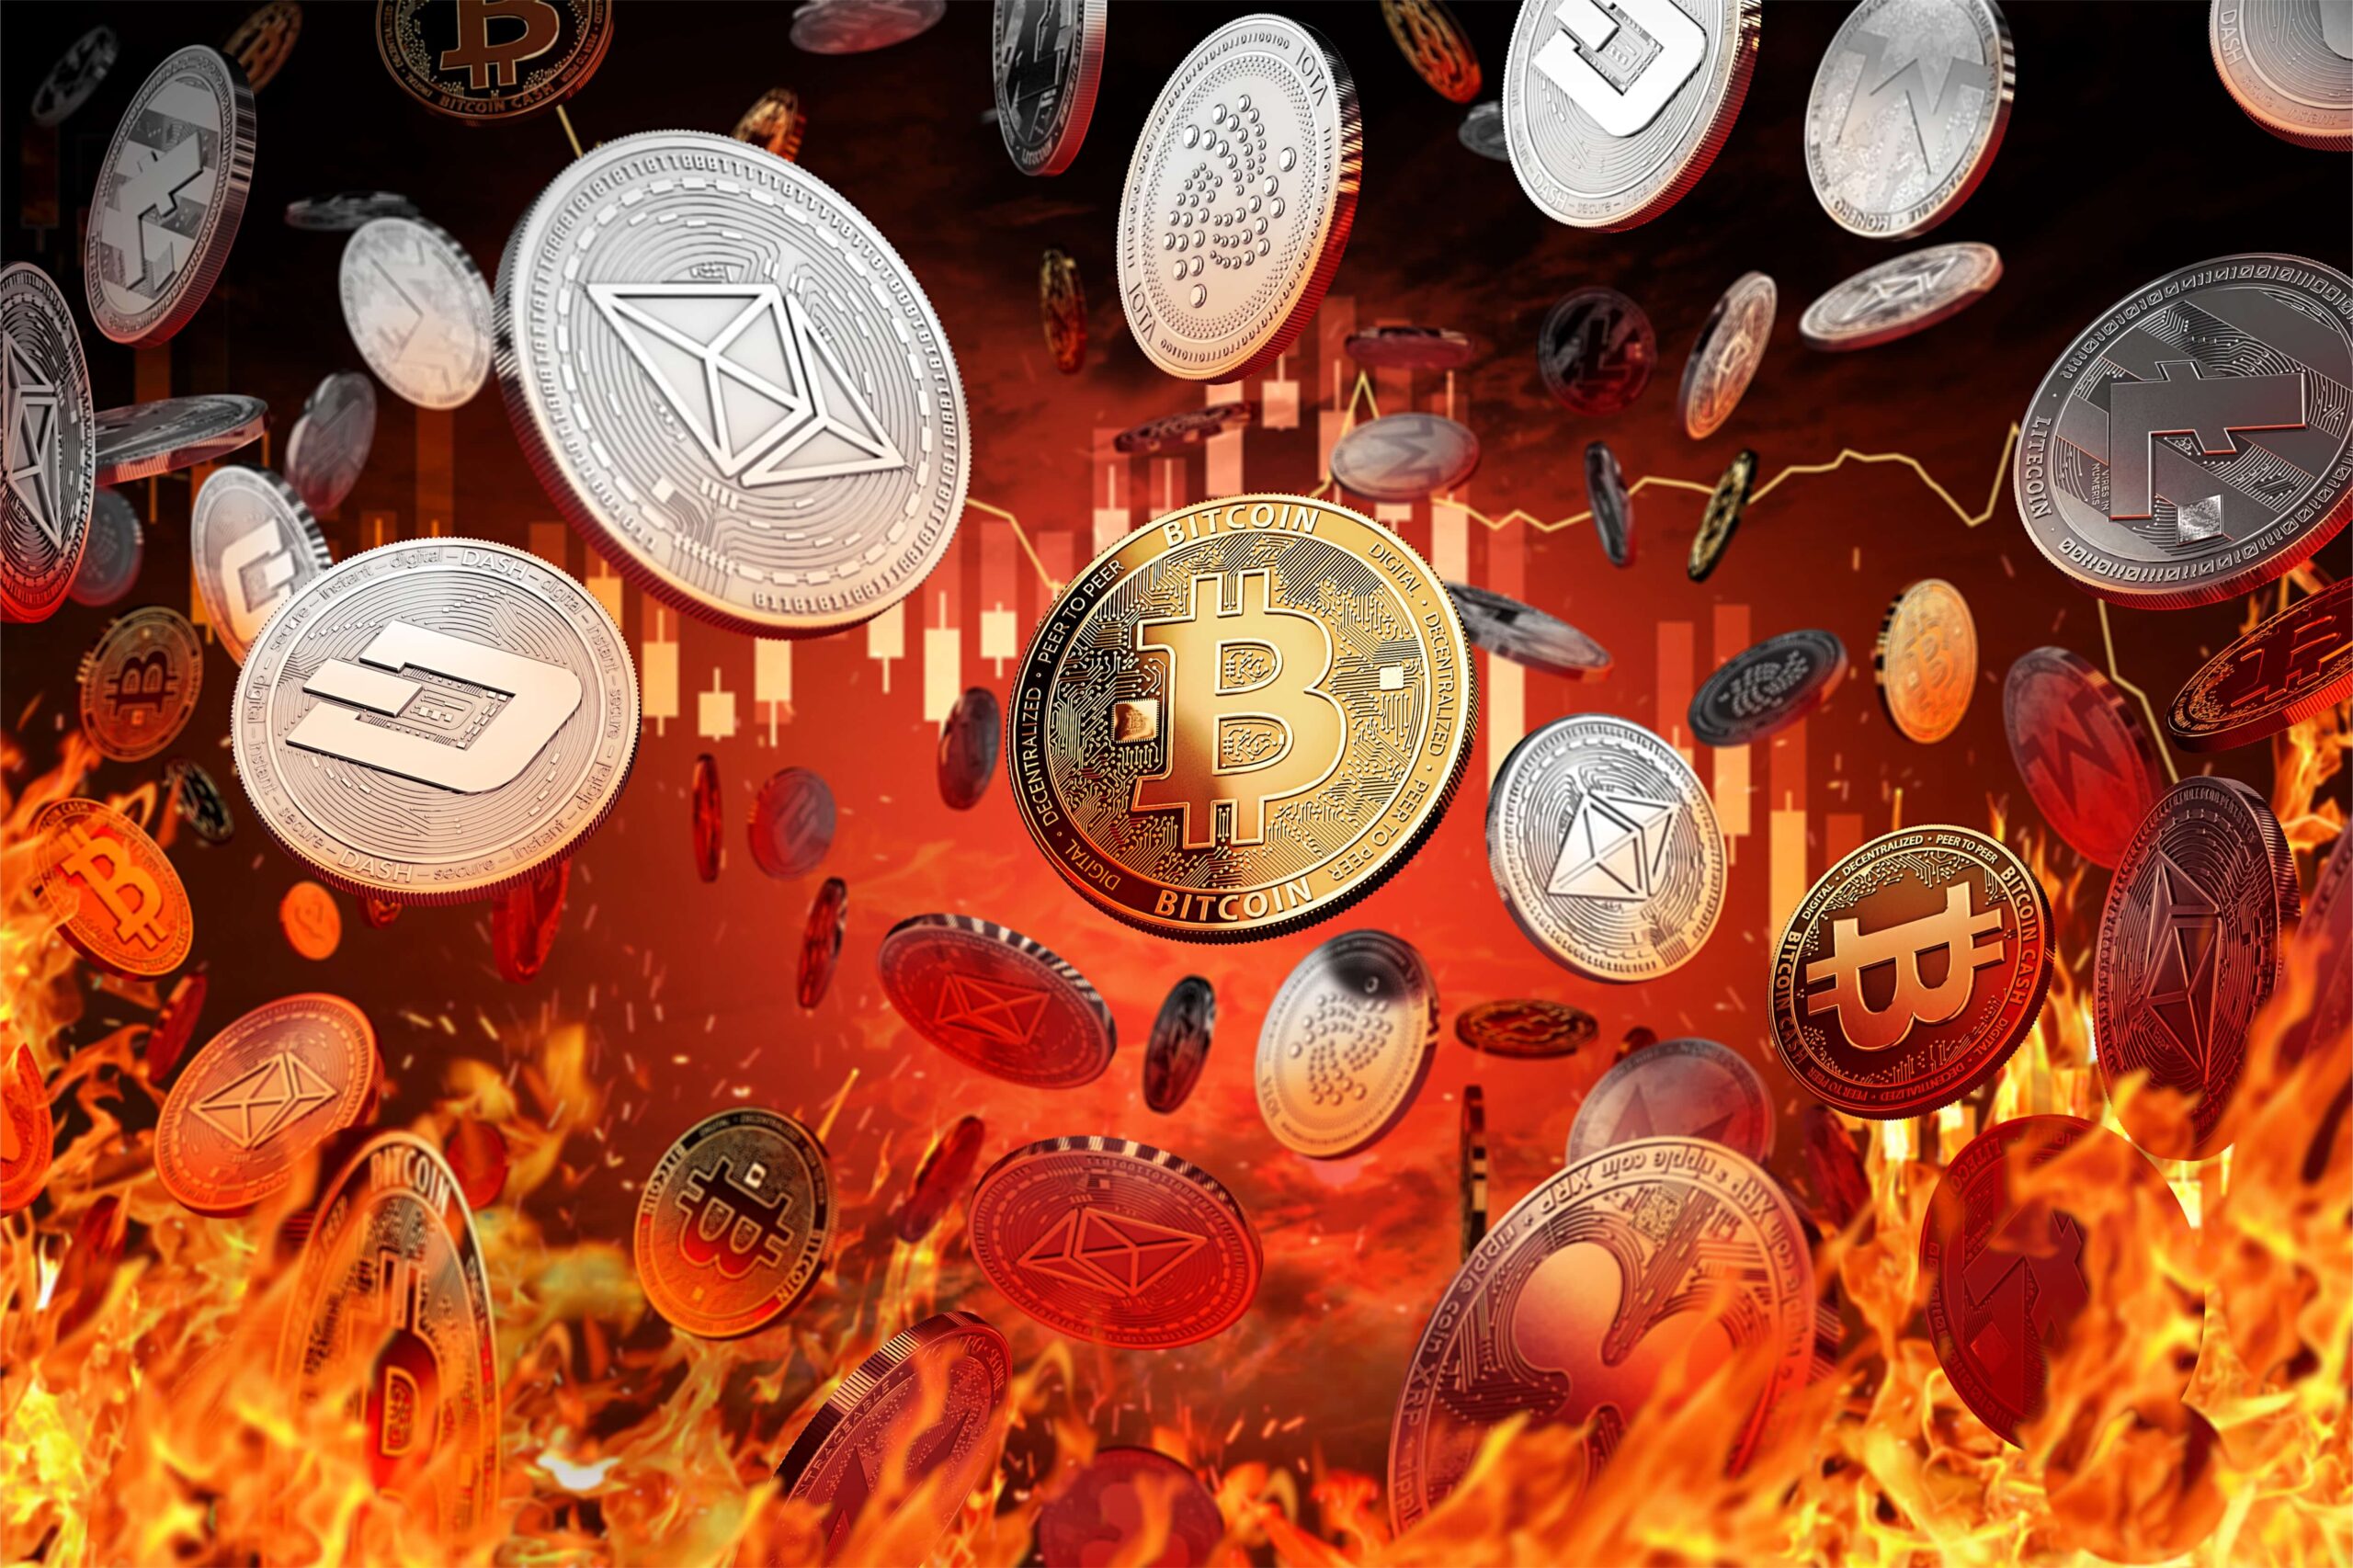 Security alert Altcoins worth $100 billion dropped in hot water